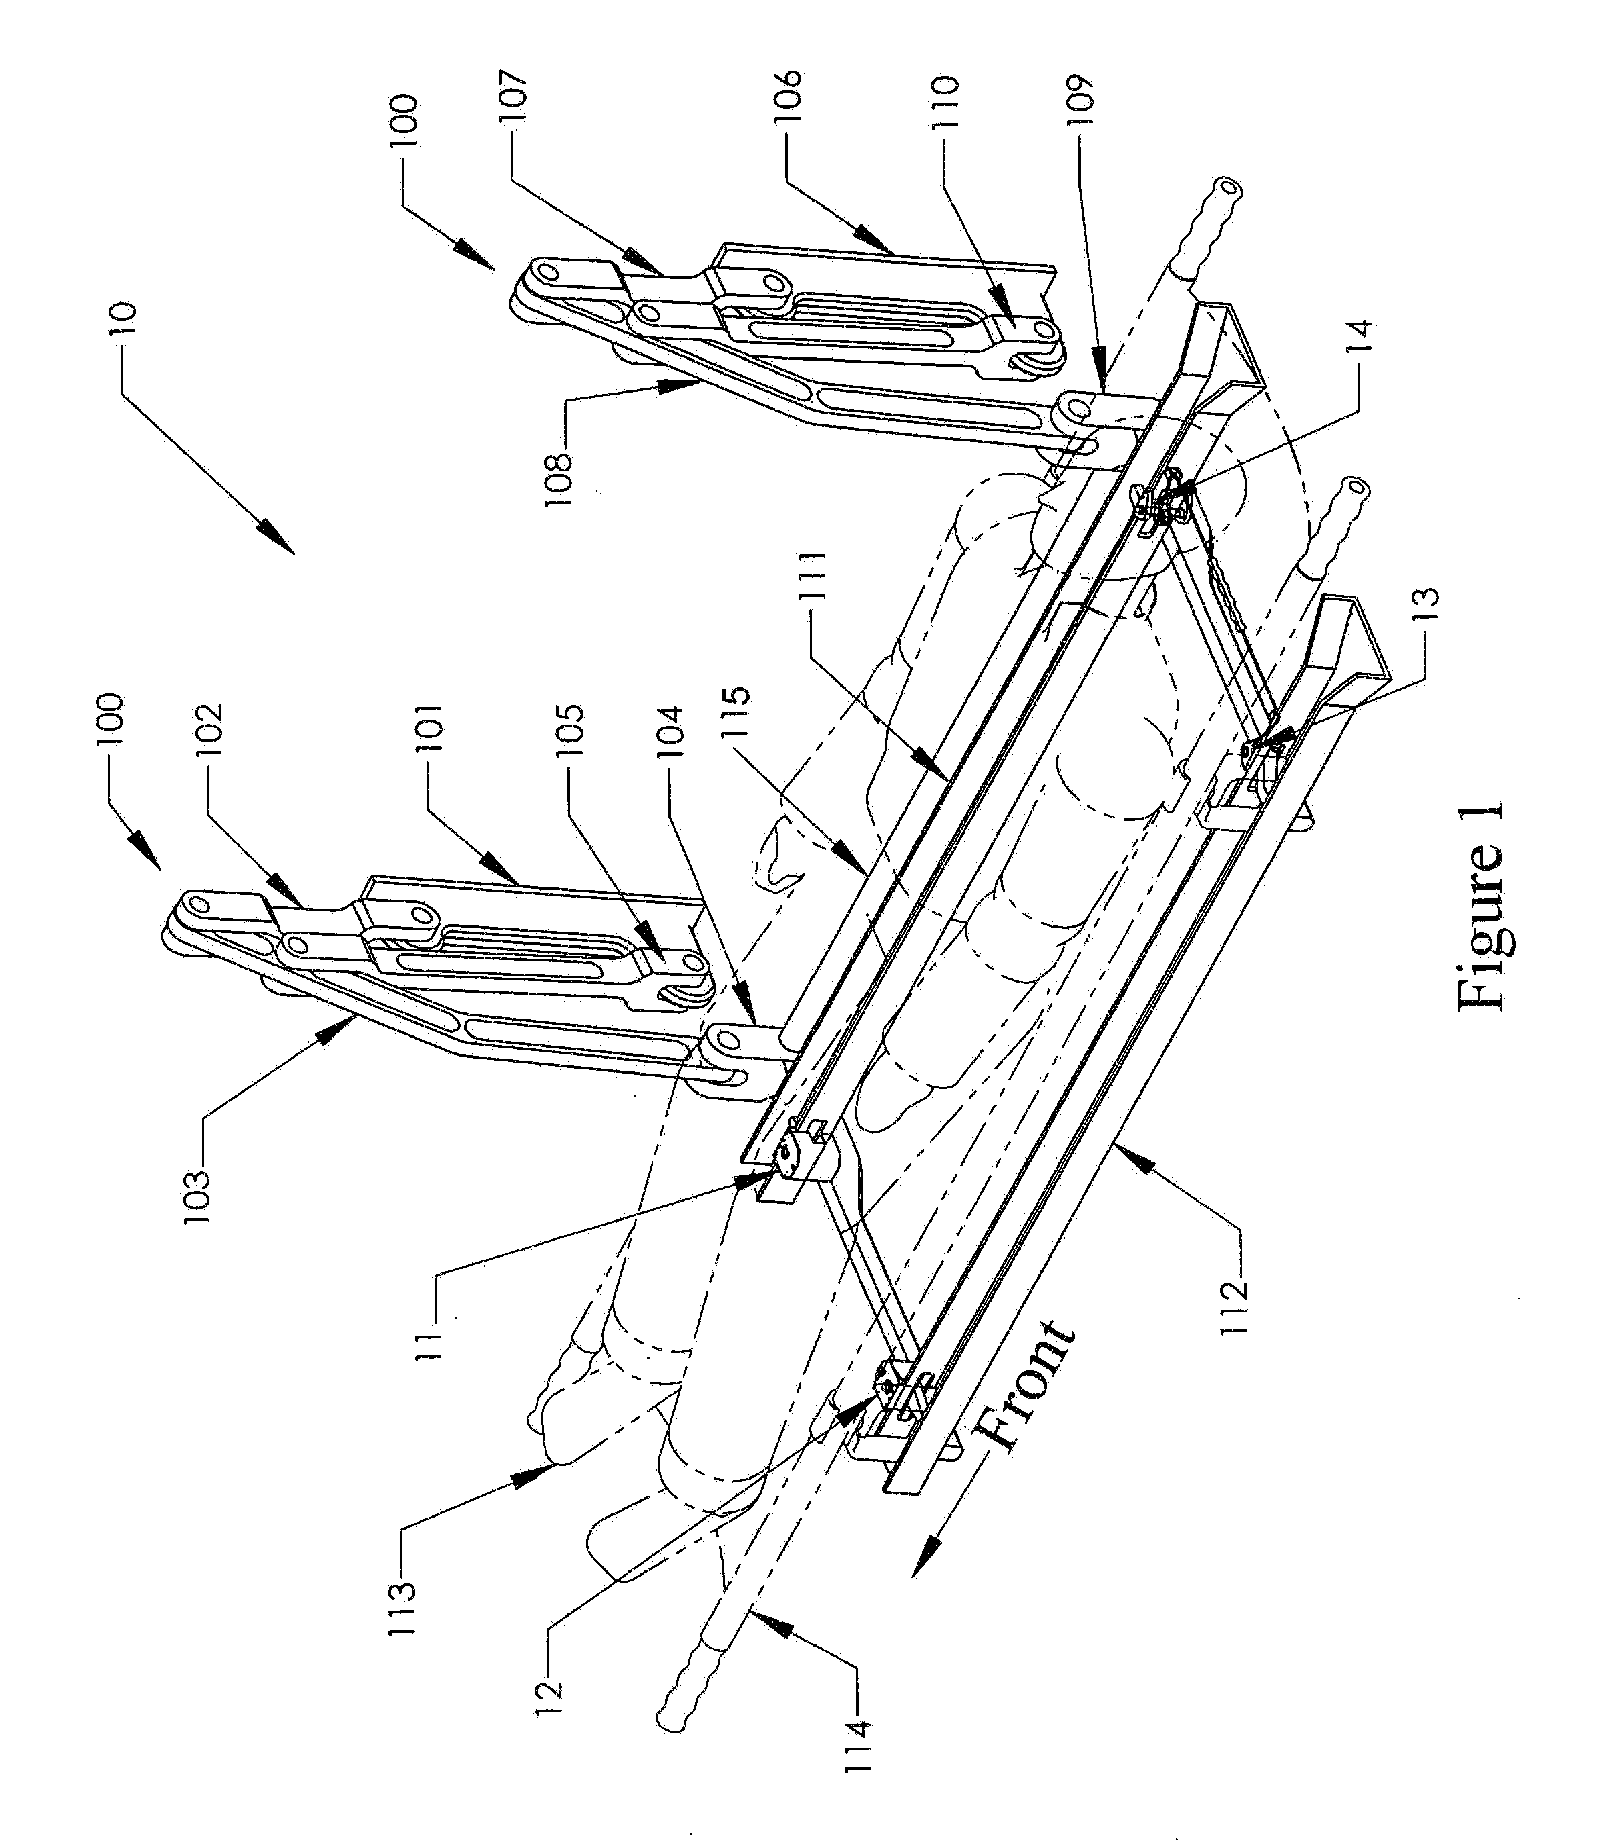 Patient support system for medical transport vehicles